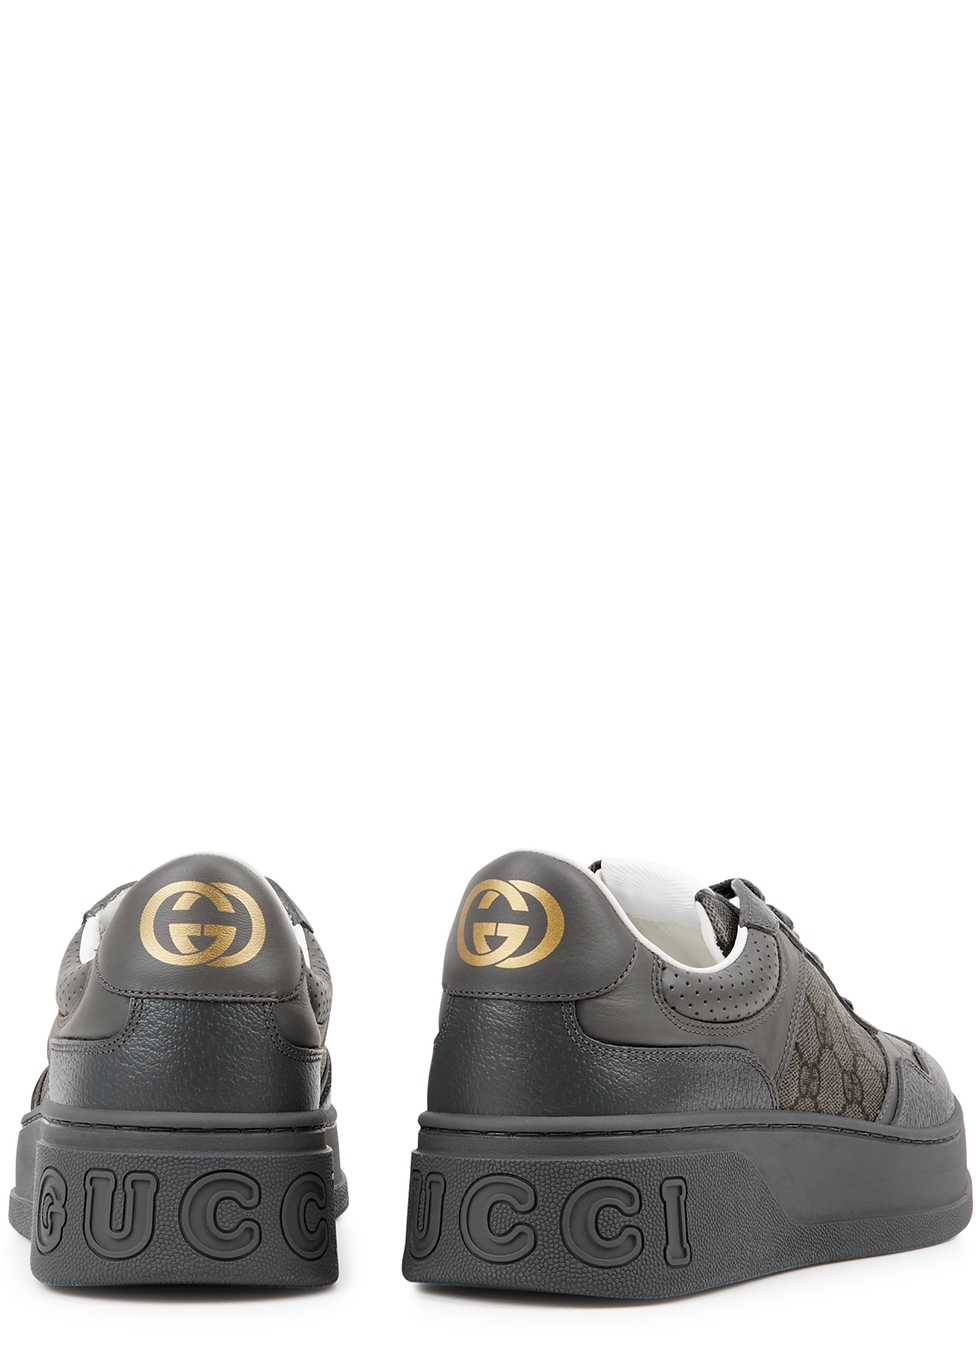 Gucci Chunky B monogrammed canvas and leather sneakers - Harvey Nichols